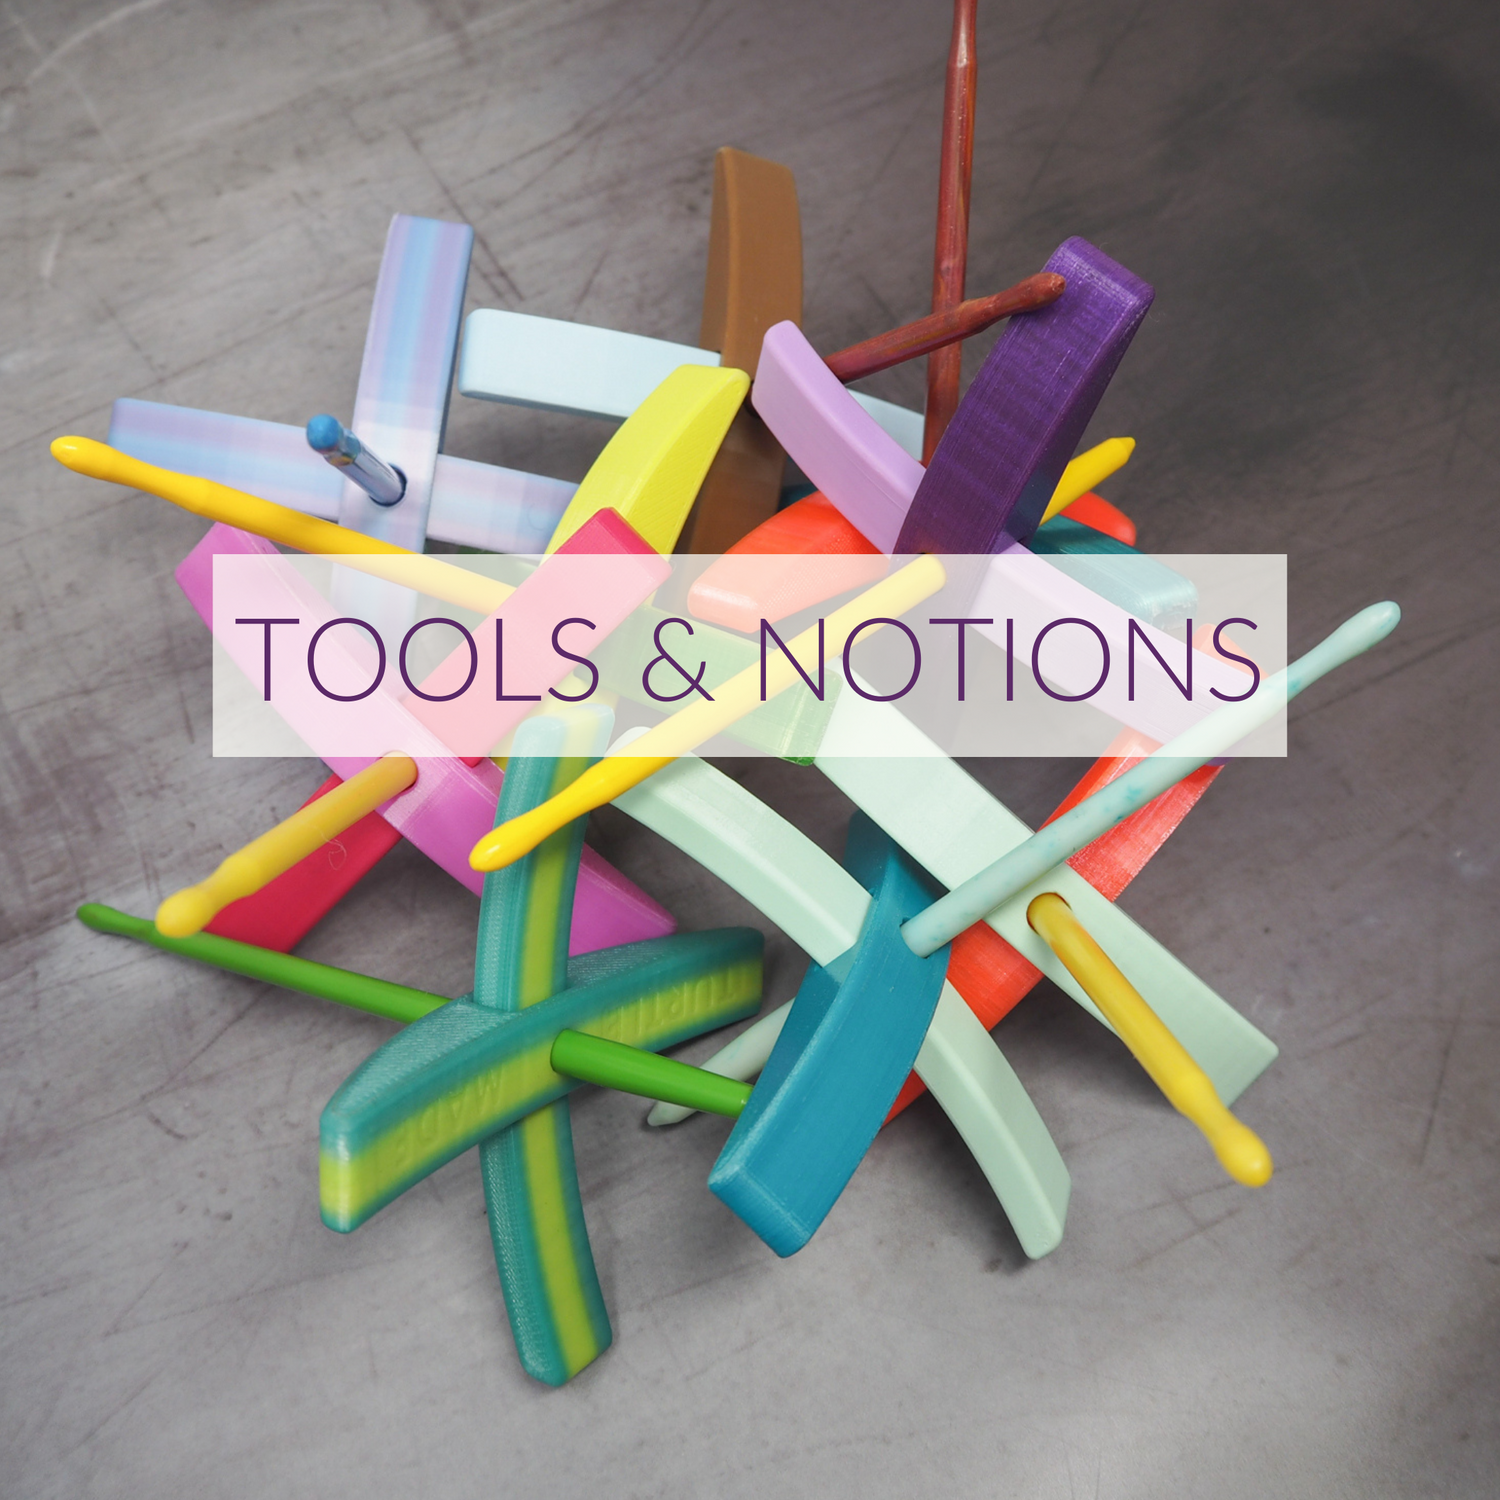 Tools and Notions